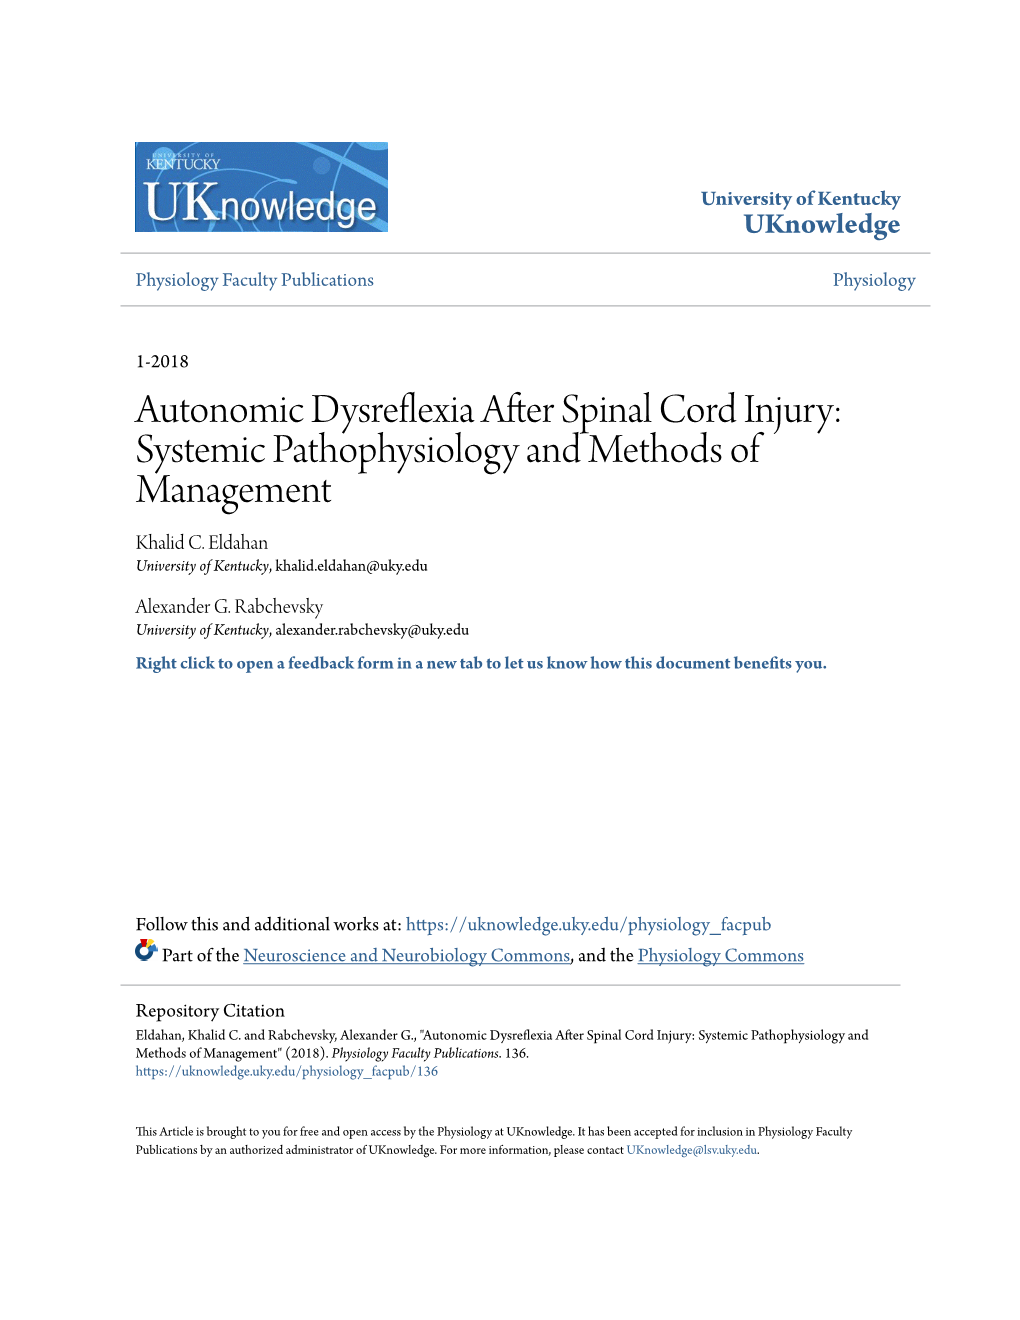 Autonomic Dysreflexia After Spinal Cord Injury: Systemic Pathophysiology and Methods of Management Khalid C